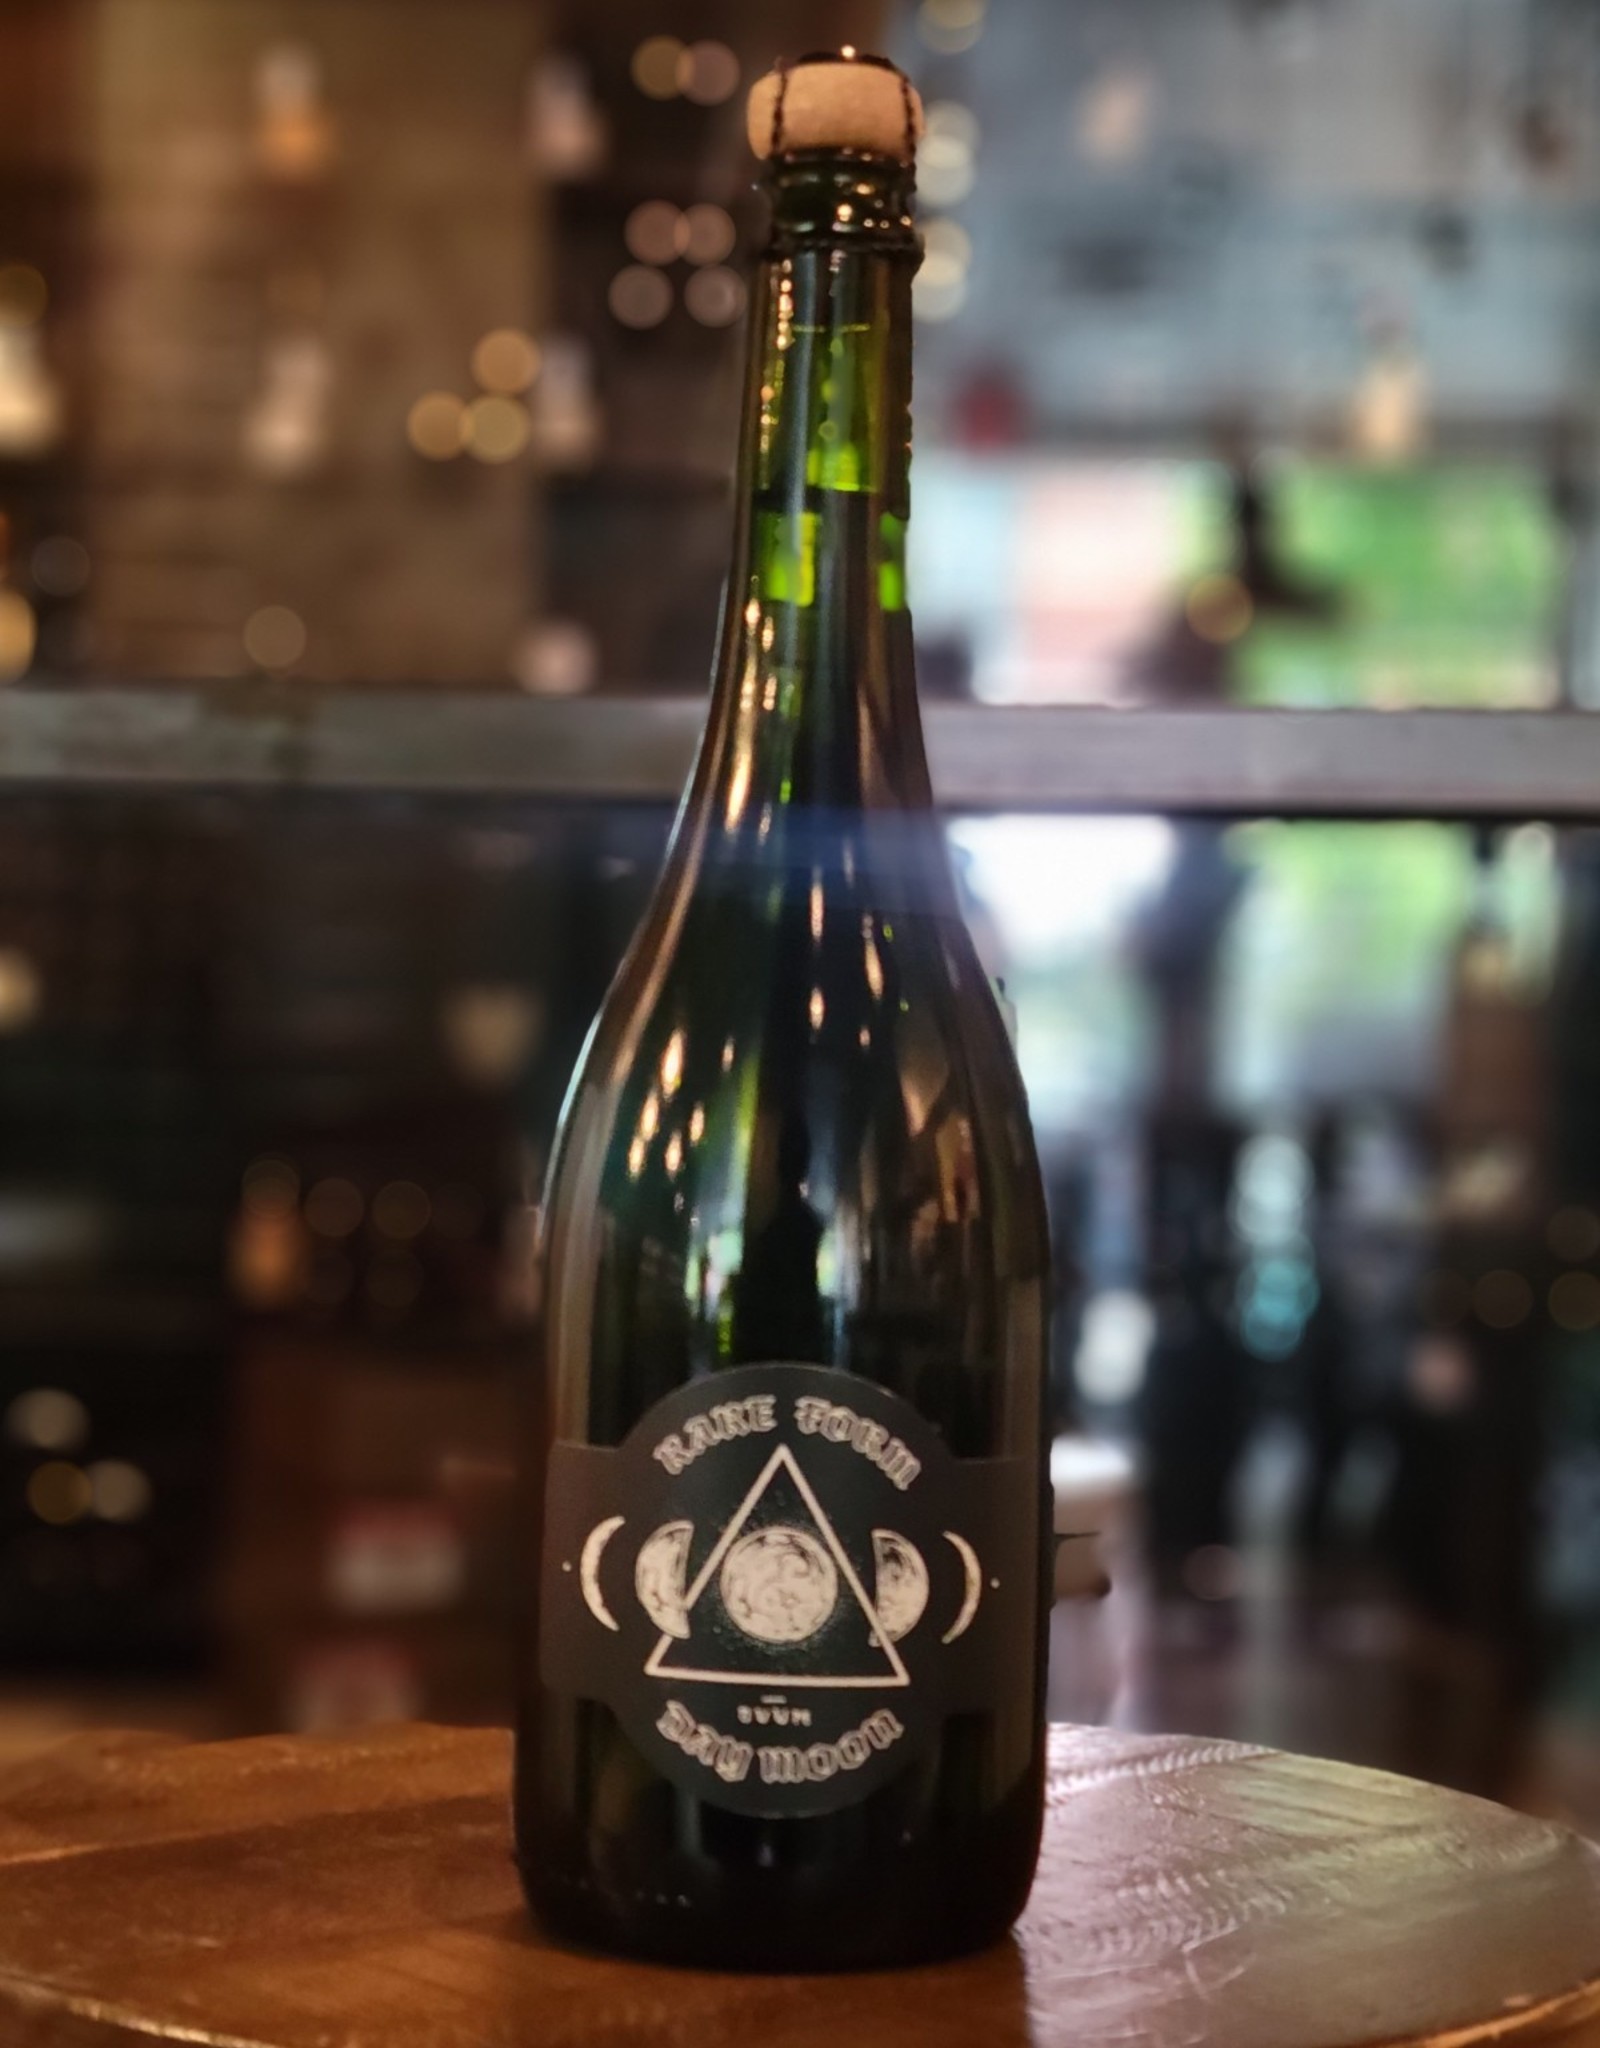 Ovum Rare Form:  Day Moon Riesling Brut Nature